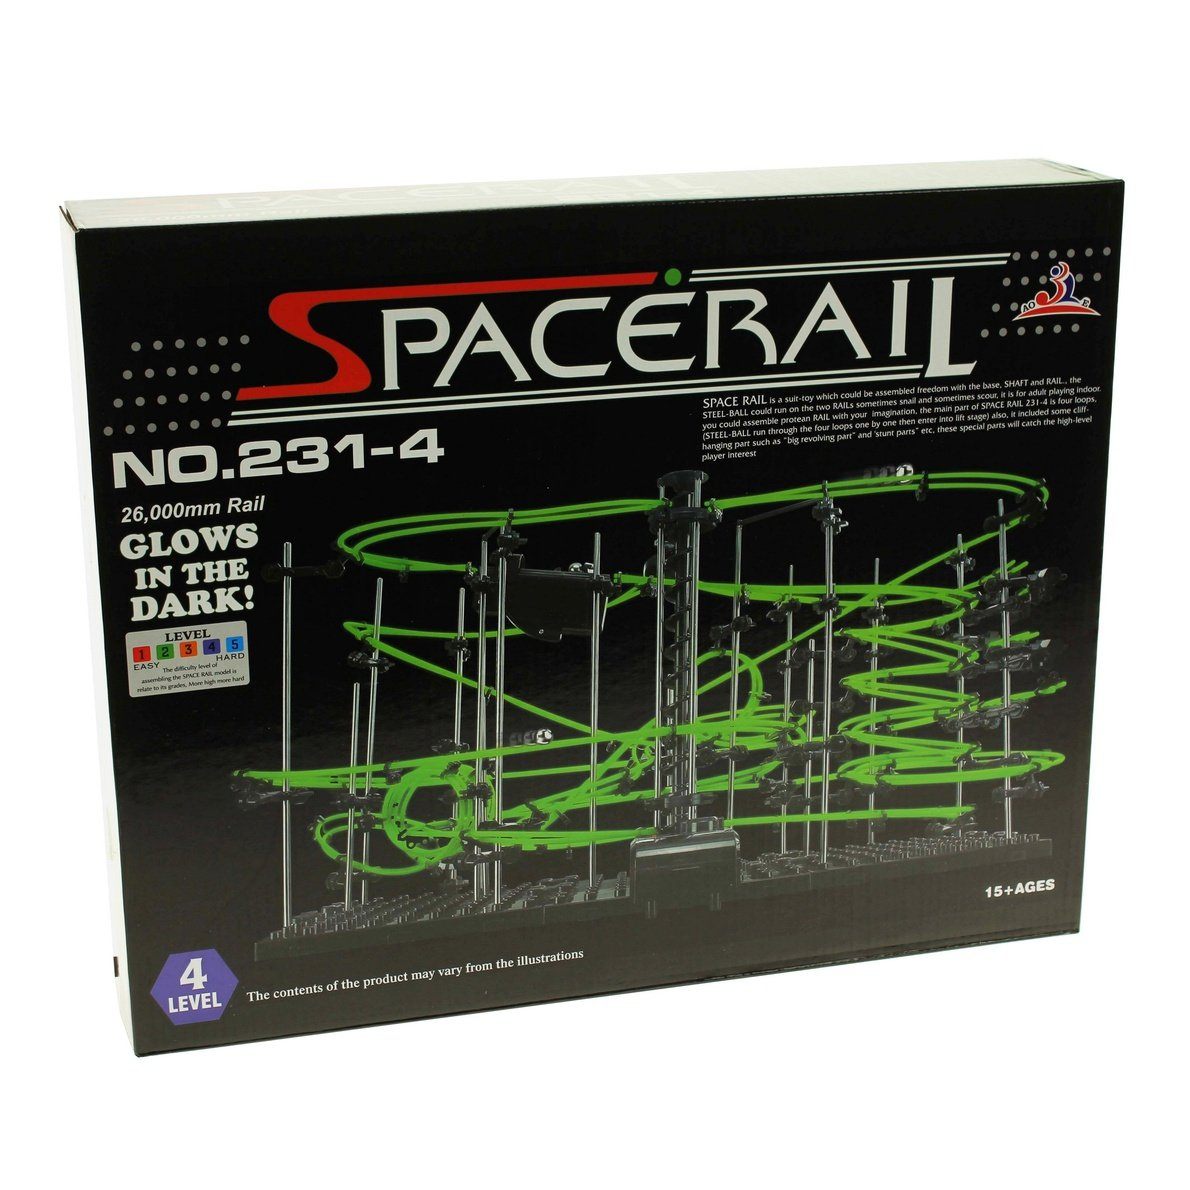 United Entertainment Spacerail Knikker Achtbaan - Level 4 Glow in the Dark